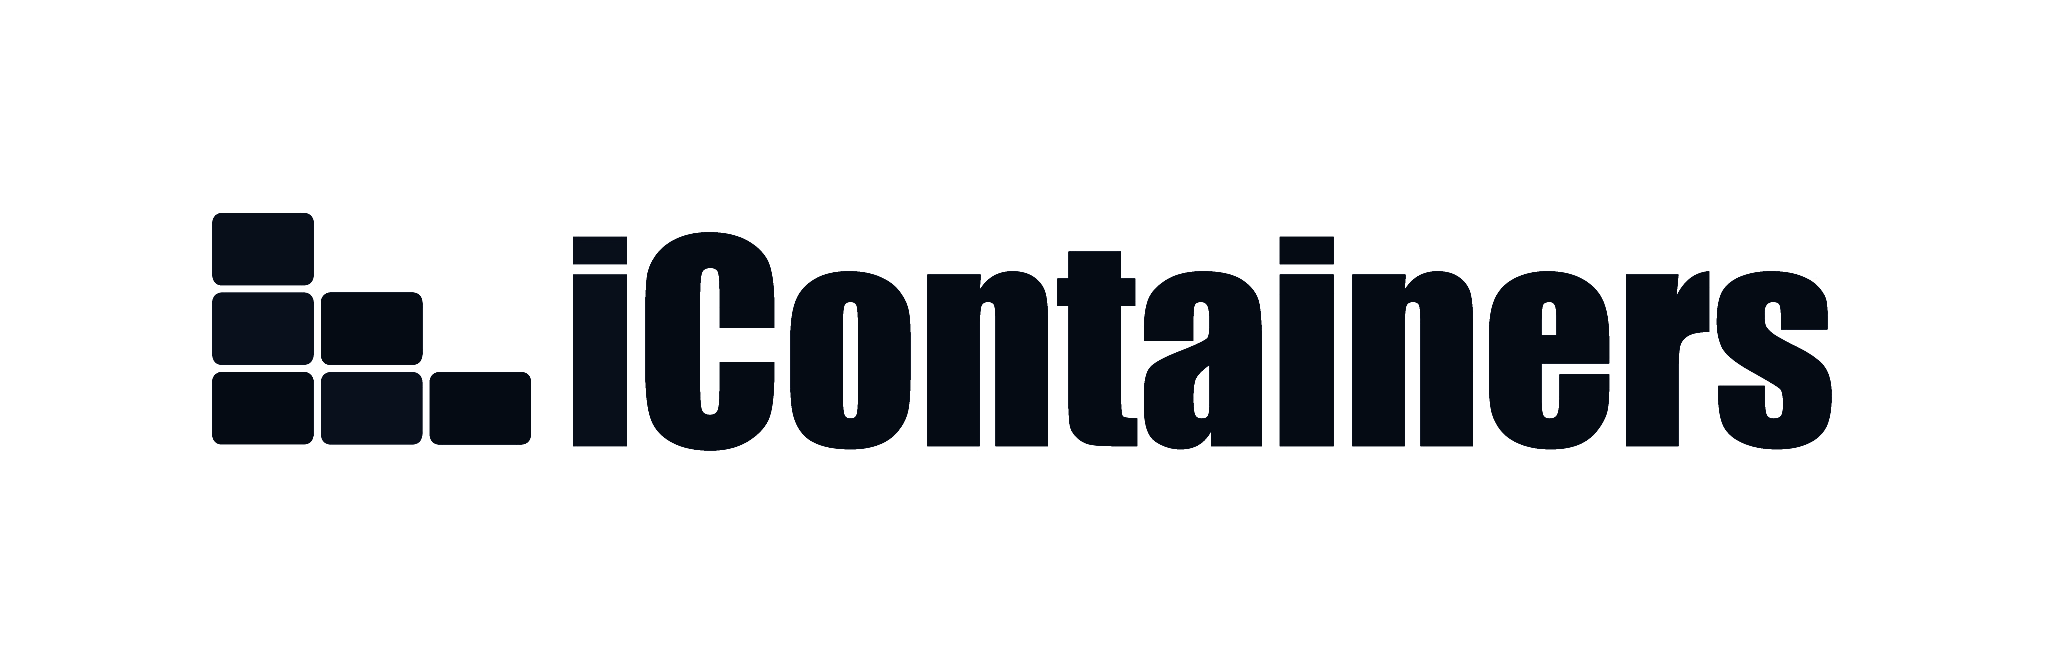 iContainers logo